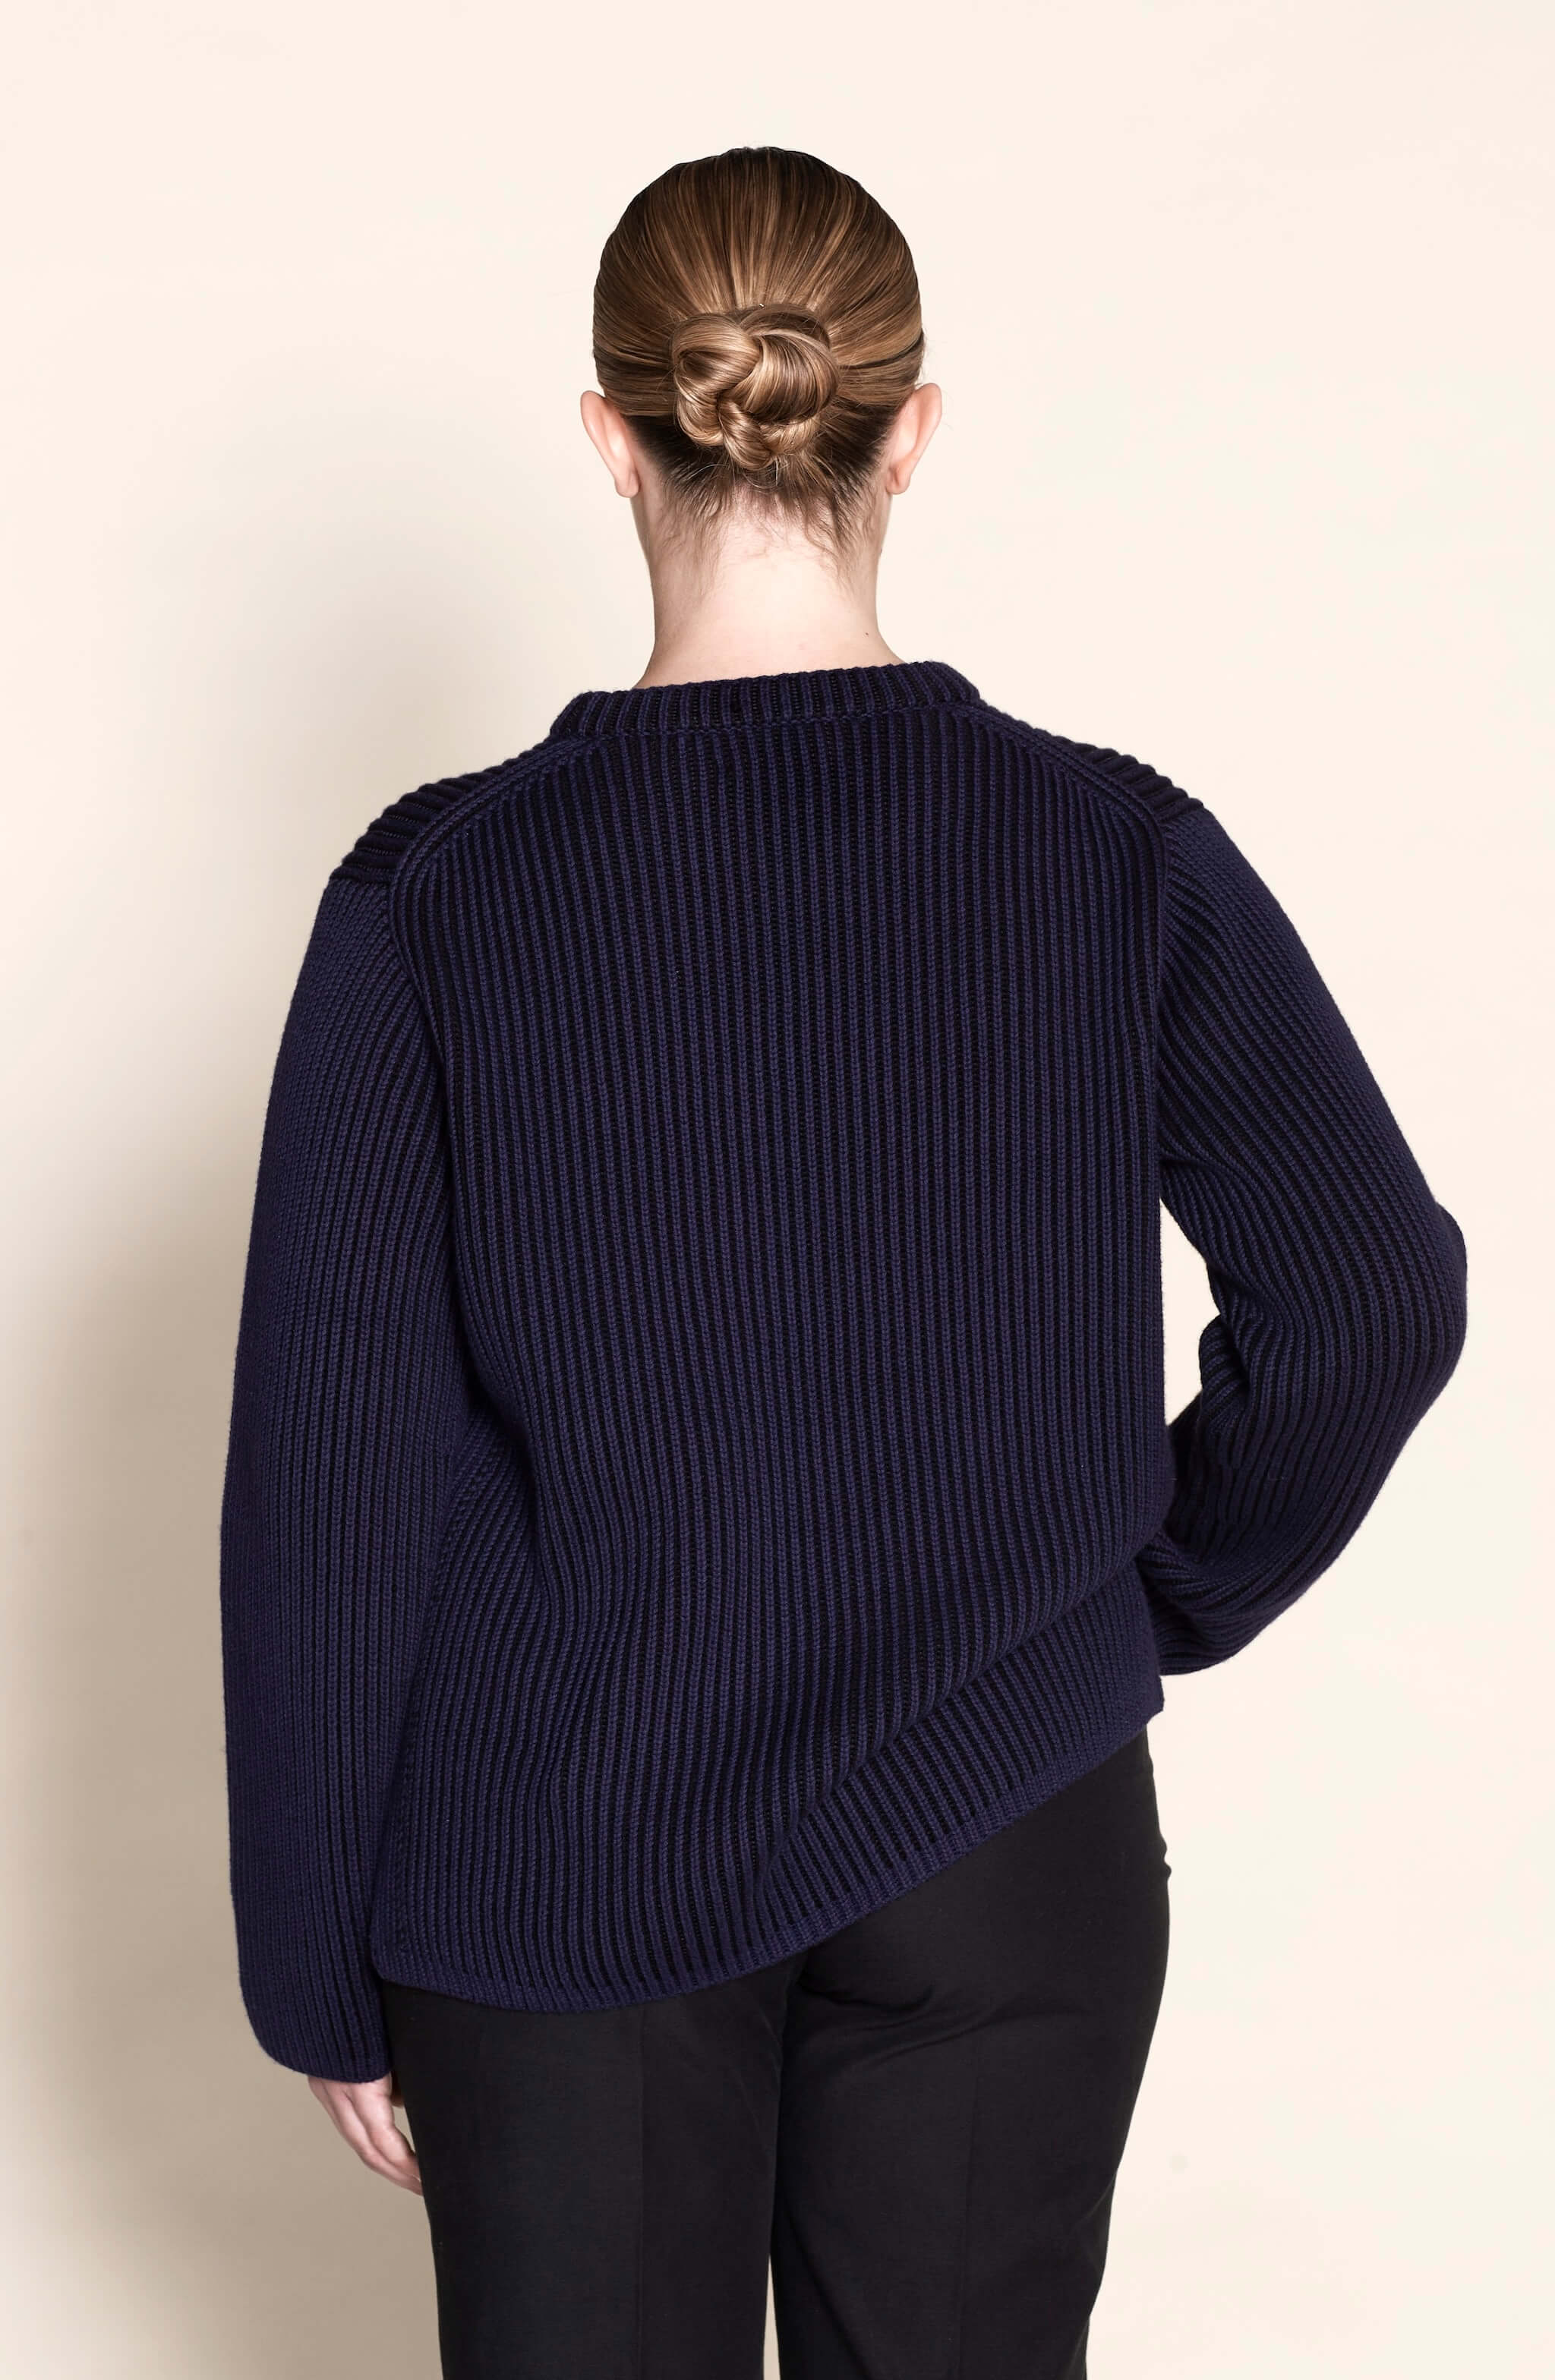 Back view of a Cyme Copenhagen navy ribbed sweater, highlighting the brand's signature knit pattern and quality craftsmanship in sustainable Danish fashion.